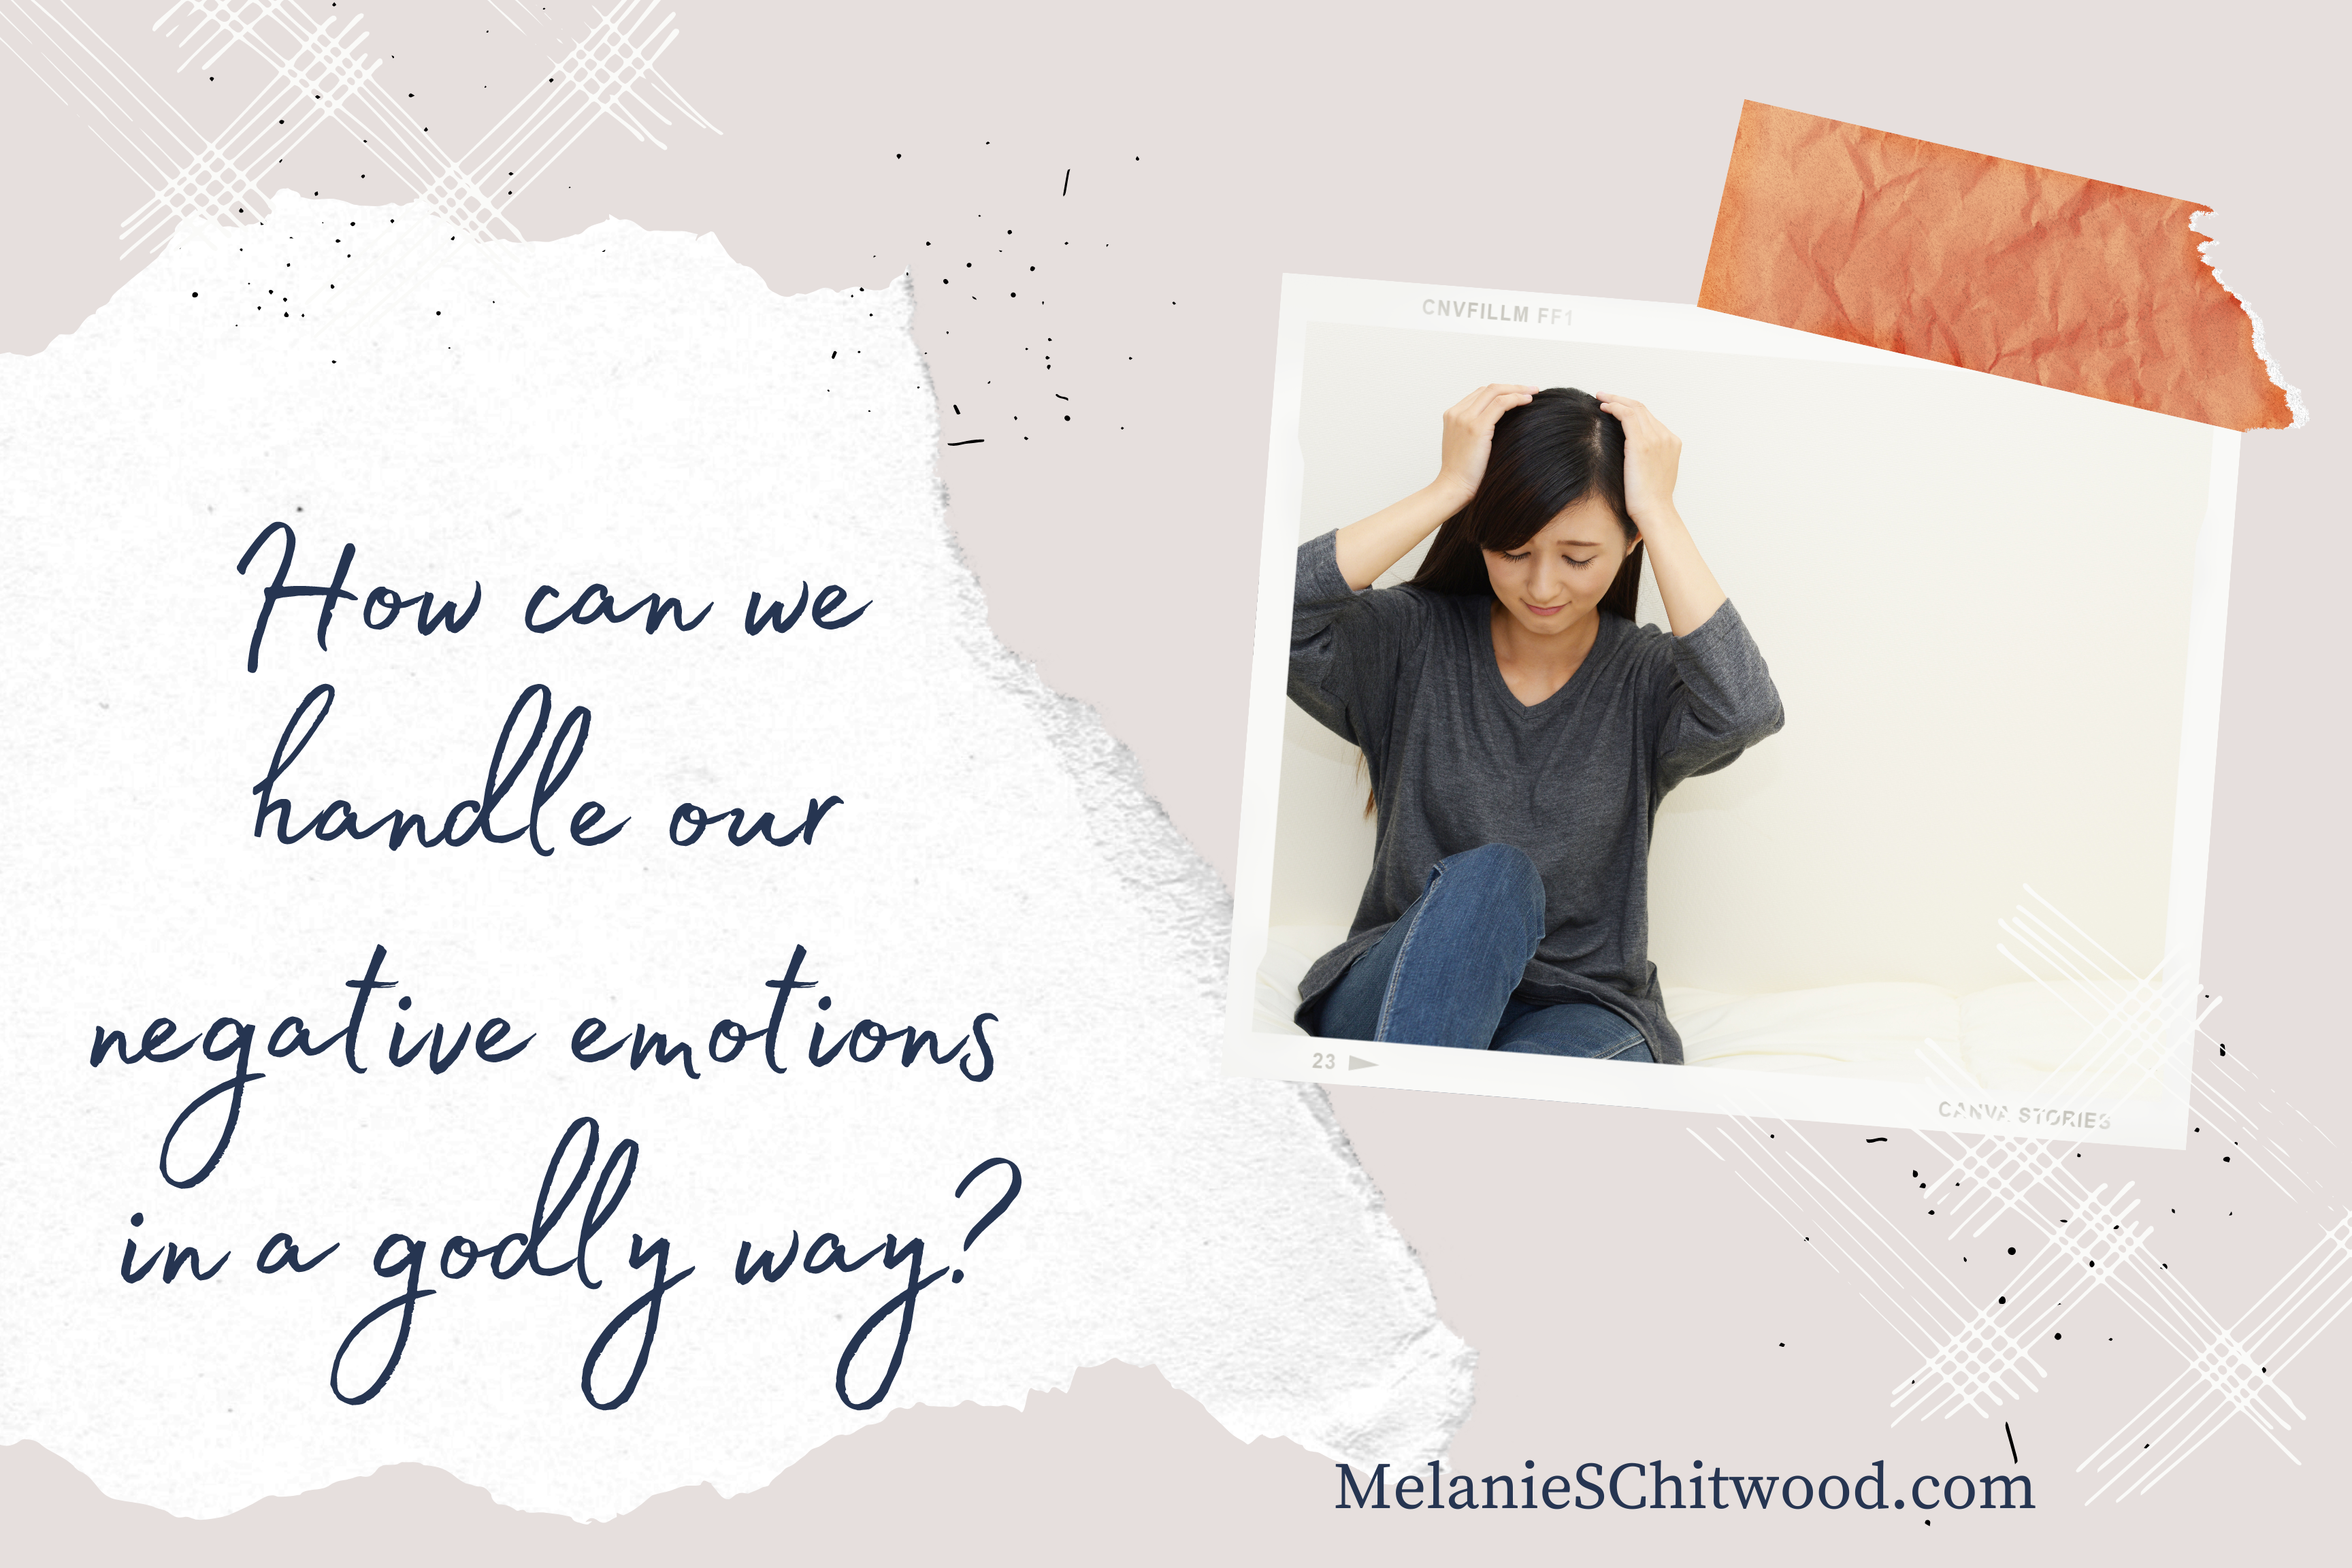 How Can We Handle Our Negative Emotions in a Godly Way?